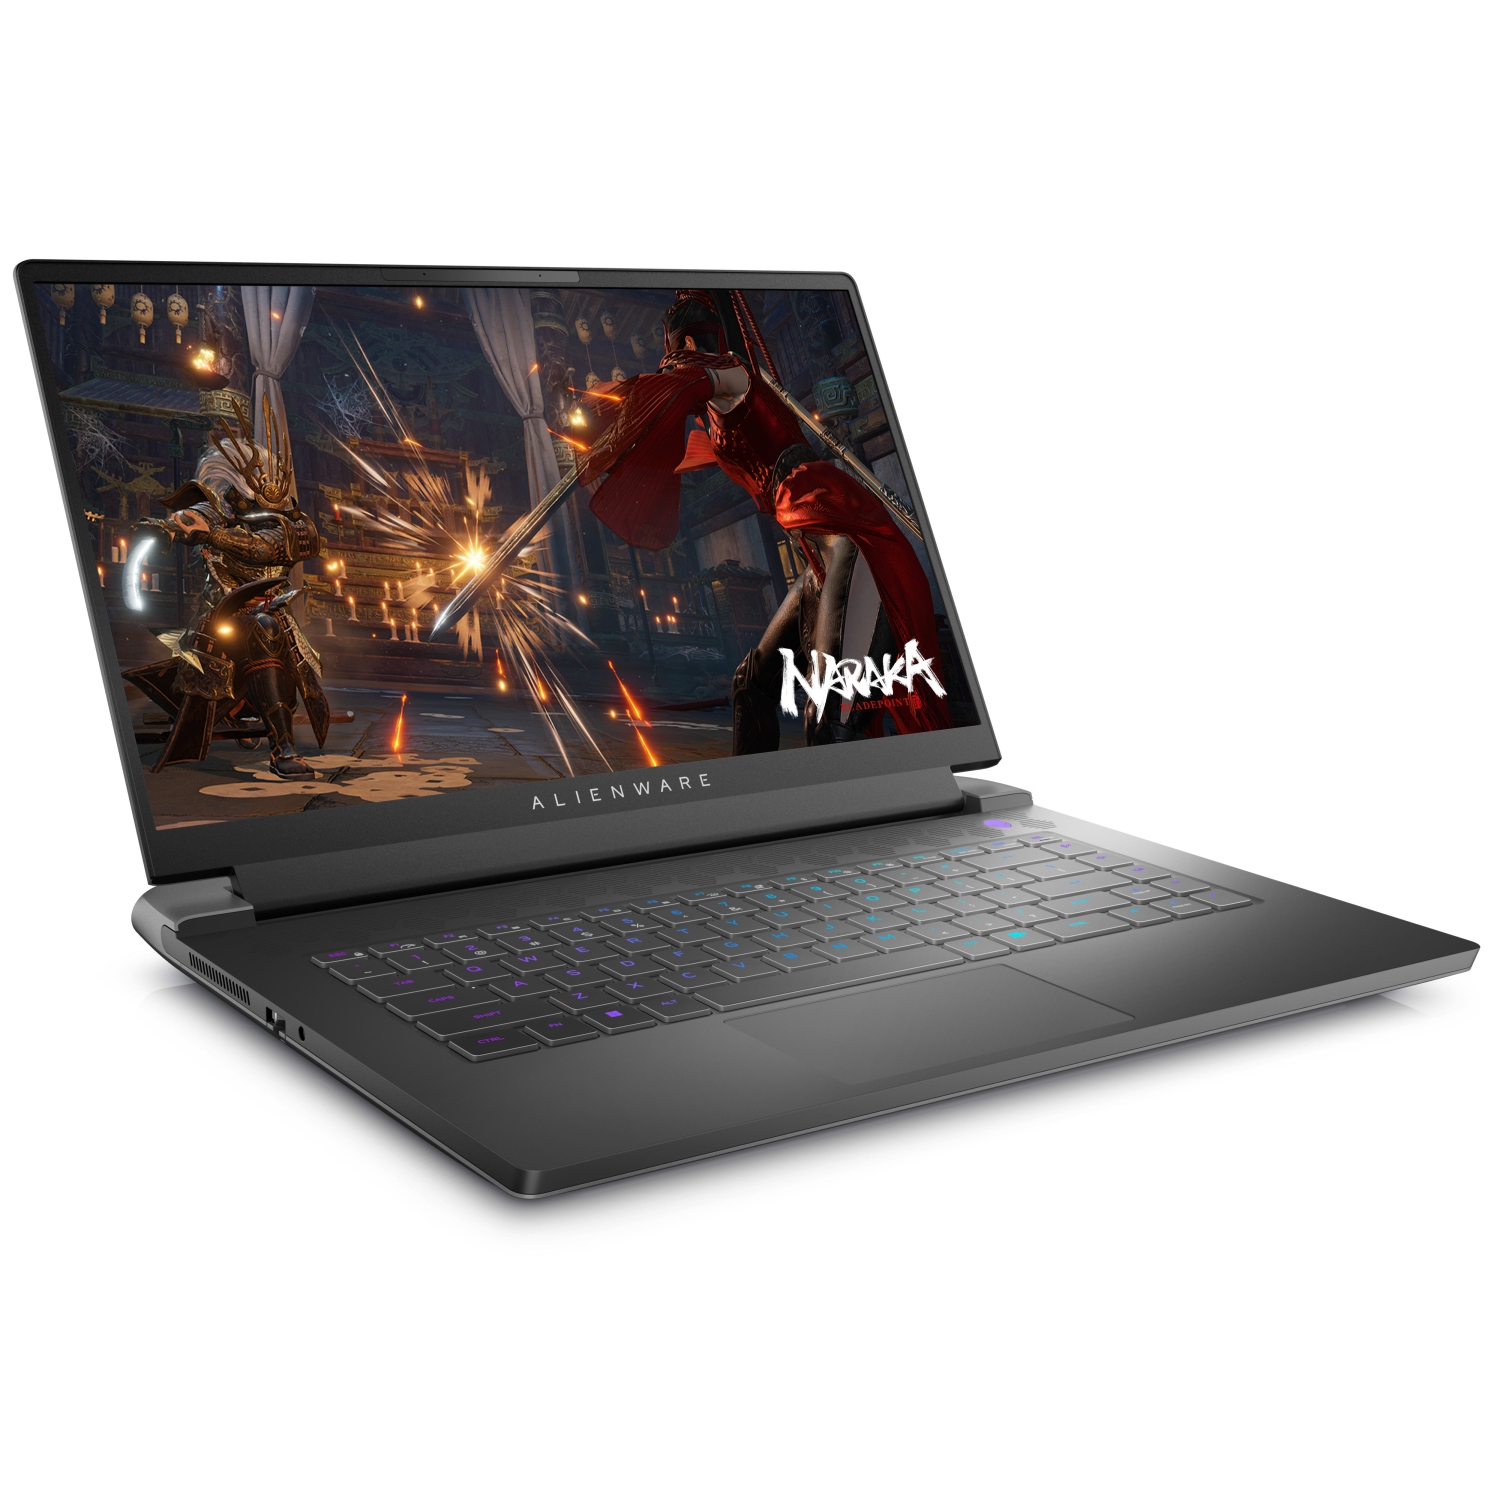 Refurbished (Excellent) – Dell Alienware m15 R7 Gaming Laptop (2022) | 15.6" FHD | Core i7 - 1TB SSD - 16GB RAM - RTX 3060 | 14 Cores @ 4.7 GHz - 12th Gen CPU - 6GB GDDR6